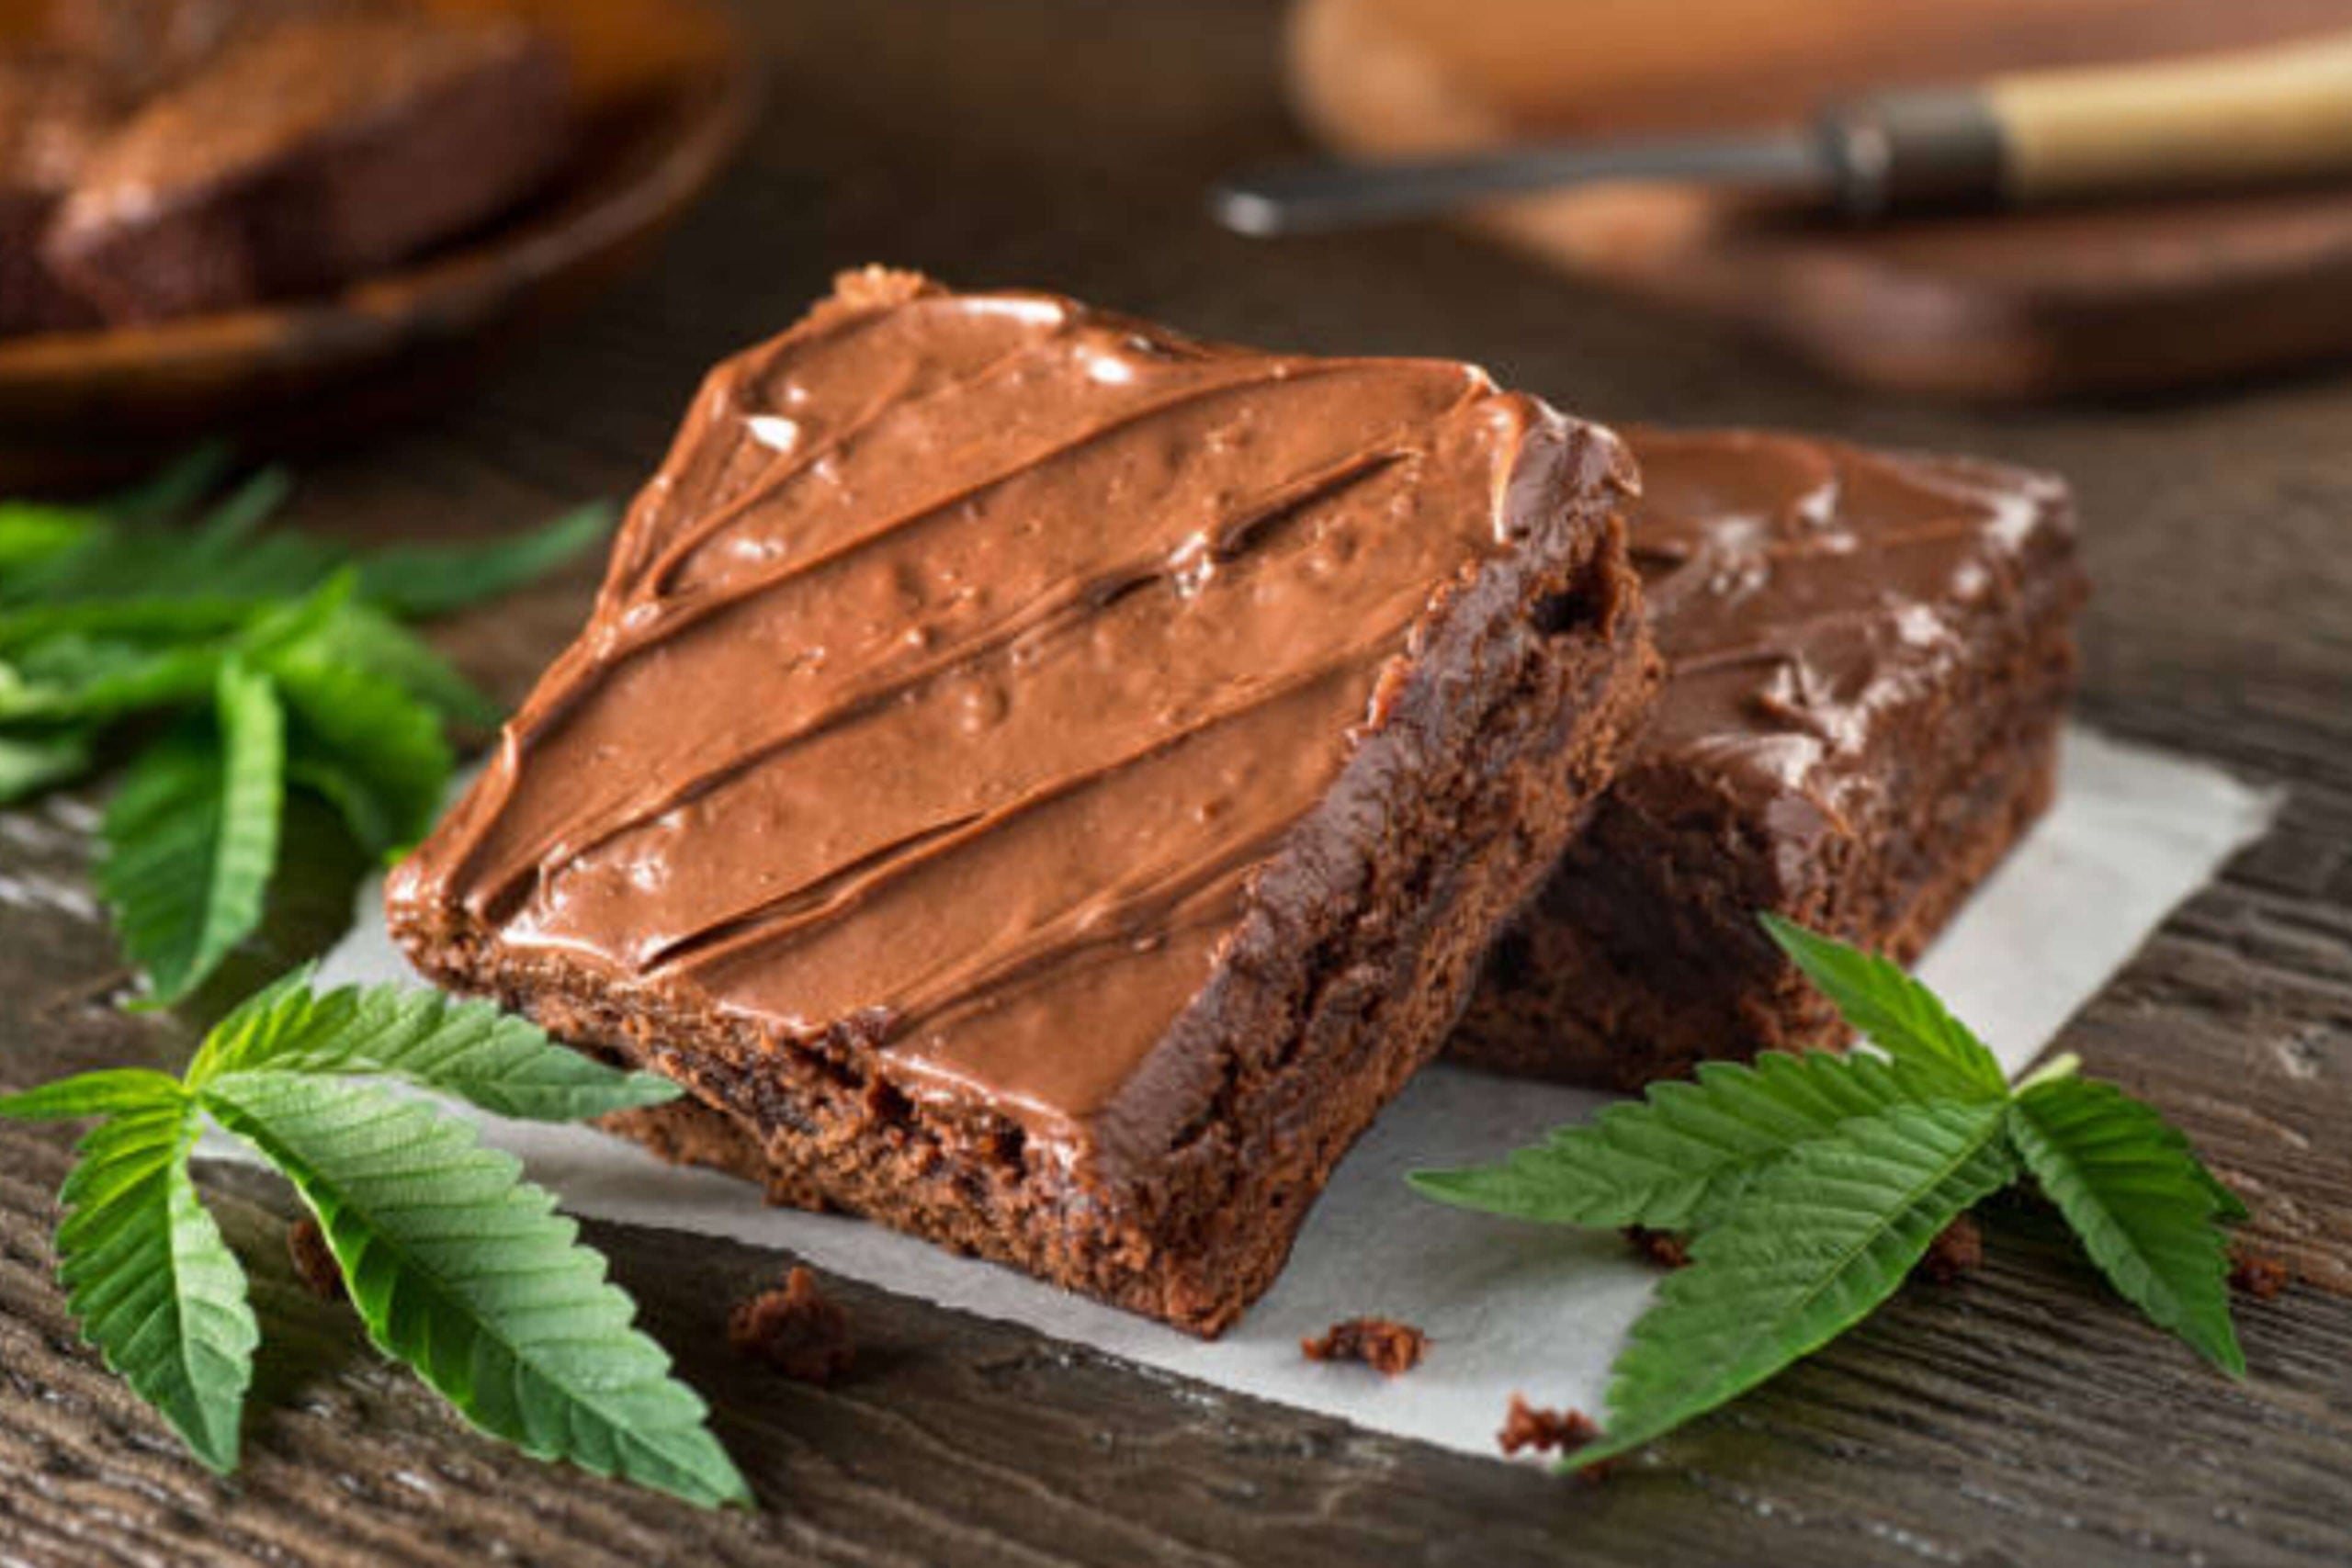 Sweet Dreams Made Delicious: Unwind with CBD Chocolate for Restful Sleep